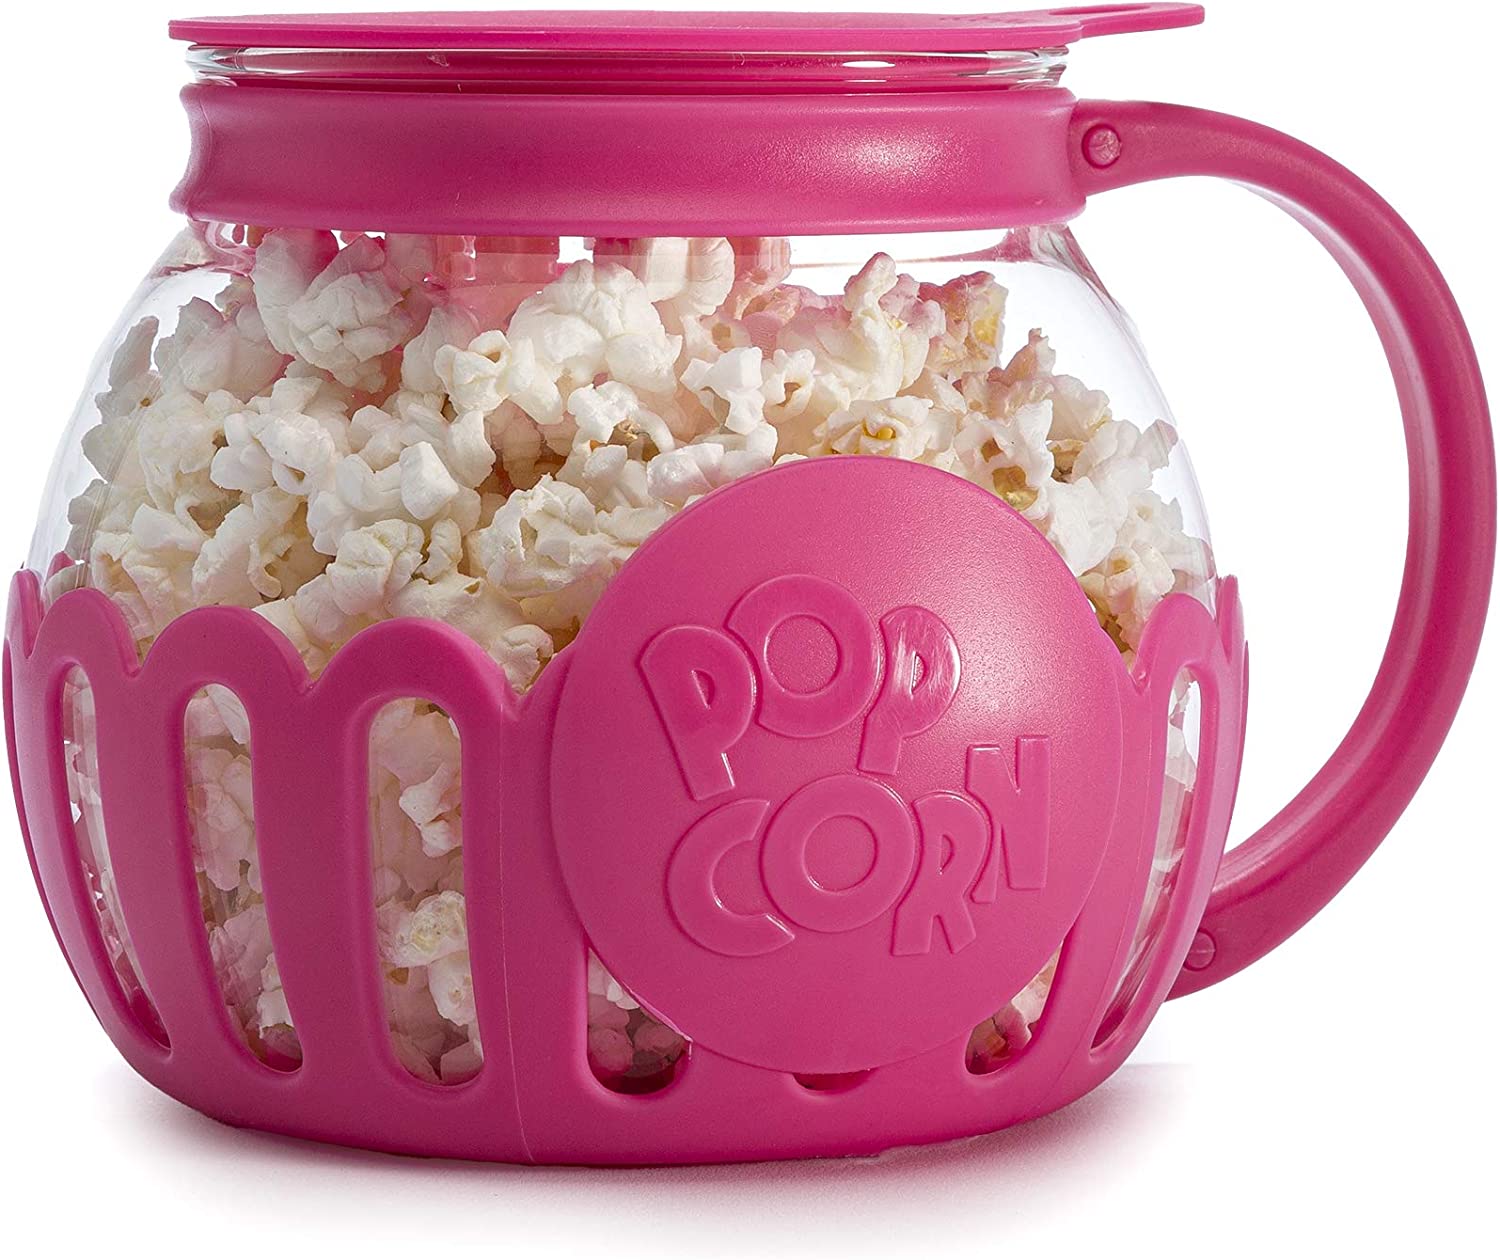 Ecolution Patented Micro-Pop Microwave Popcorn Popper with Temperature Safe Glass, 3-in-1 Lid Measures Kernels and Melts Butter, Made Without BPA, Dishwasher Sa